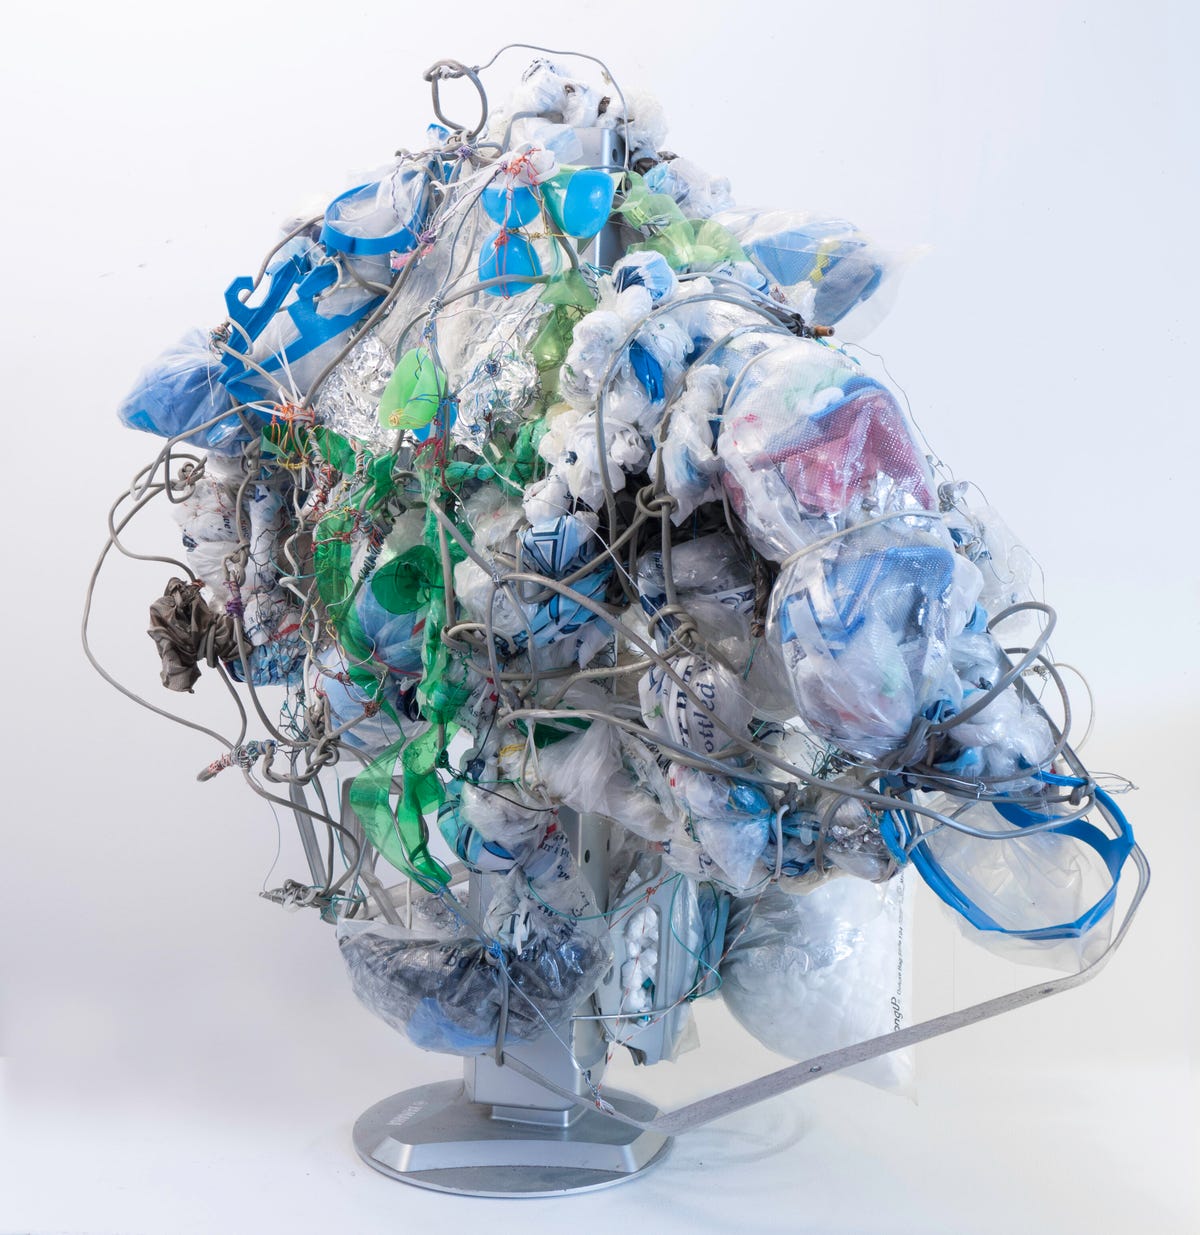 a sculpture of recycled plastic